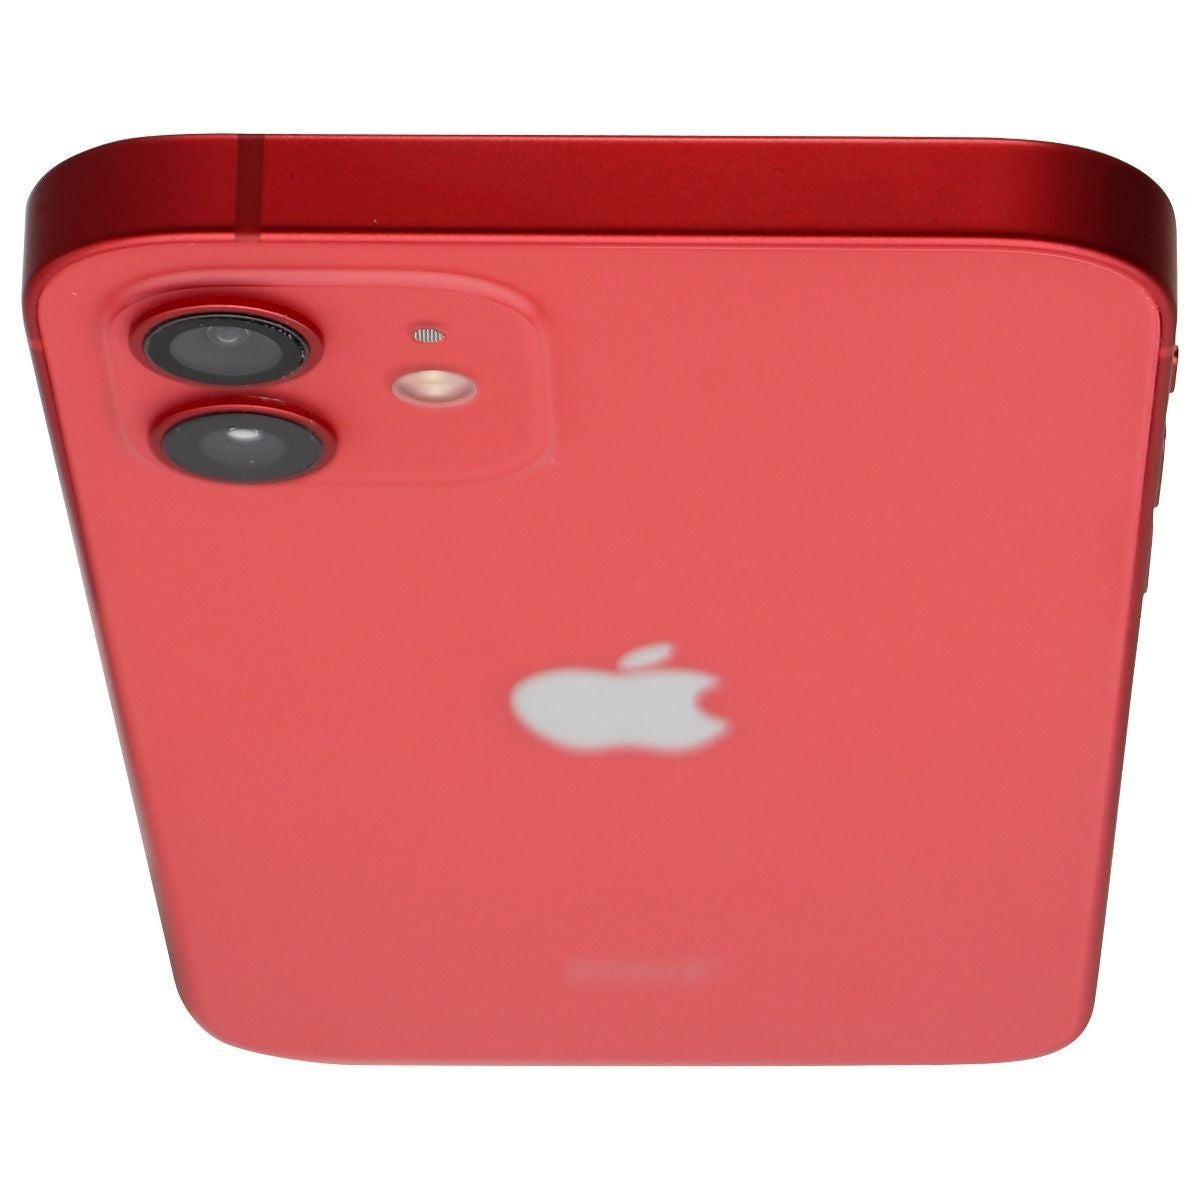 Apple iPhone 12 (6.1-inch) (A2172) Spectrum Mobile ONLY - 64GB / (Product) RED Cell Phones & Smartphones Apple    - Simple Cell Bulk Wholesale Pricing - USA Seller